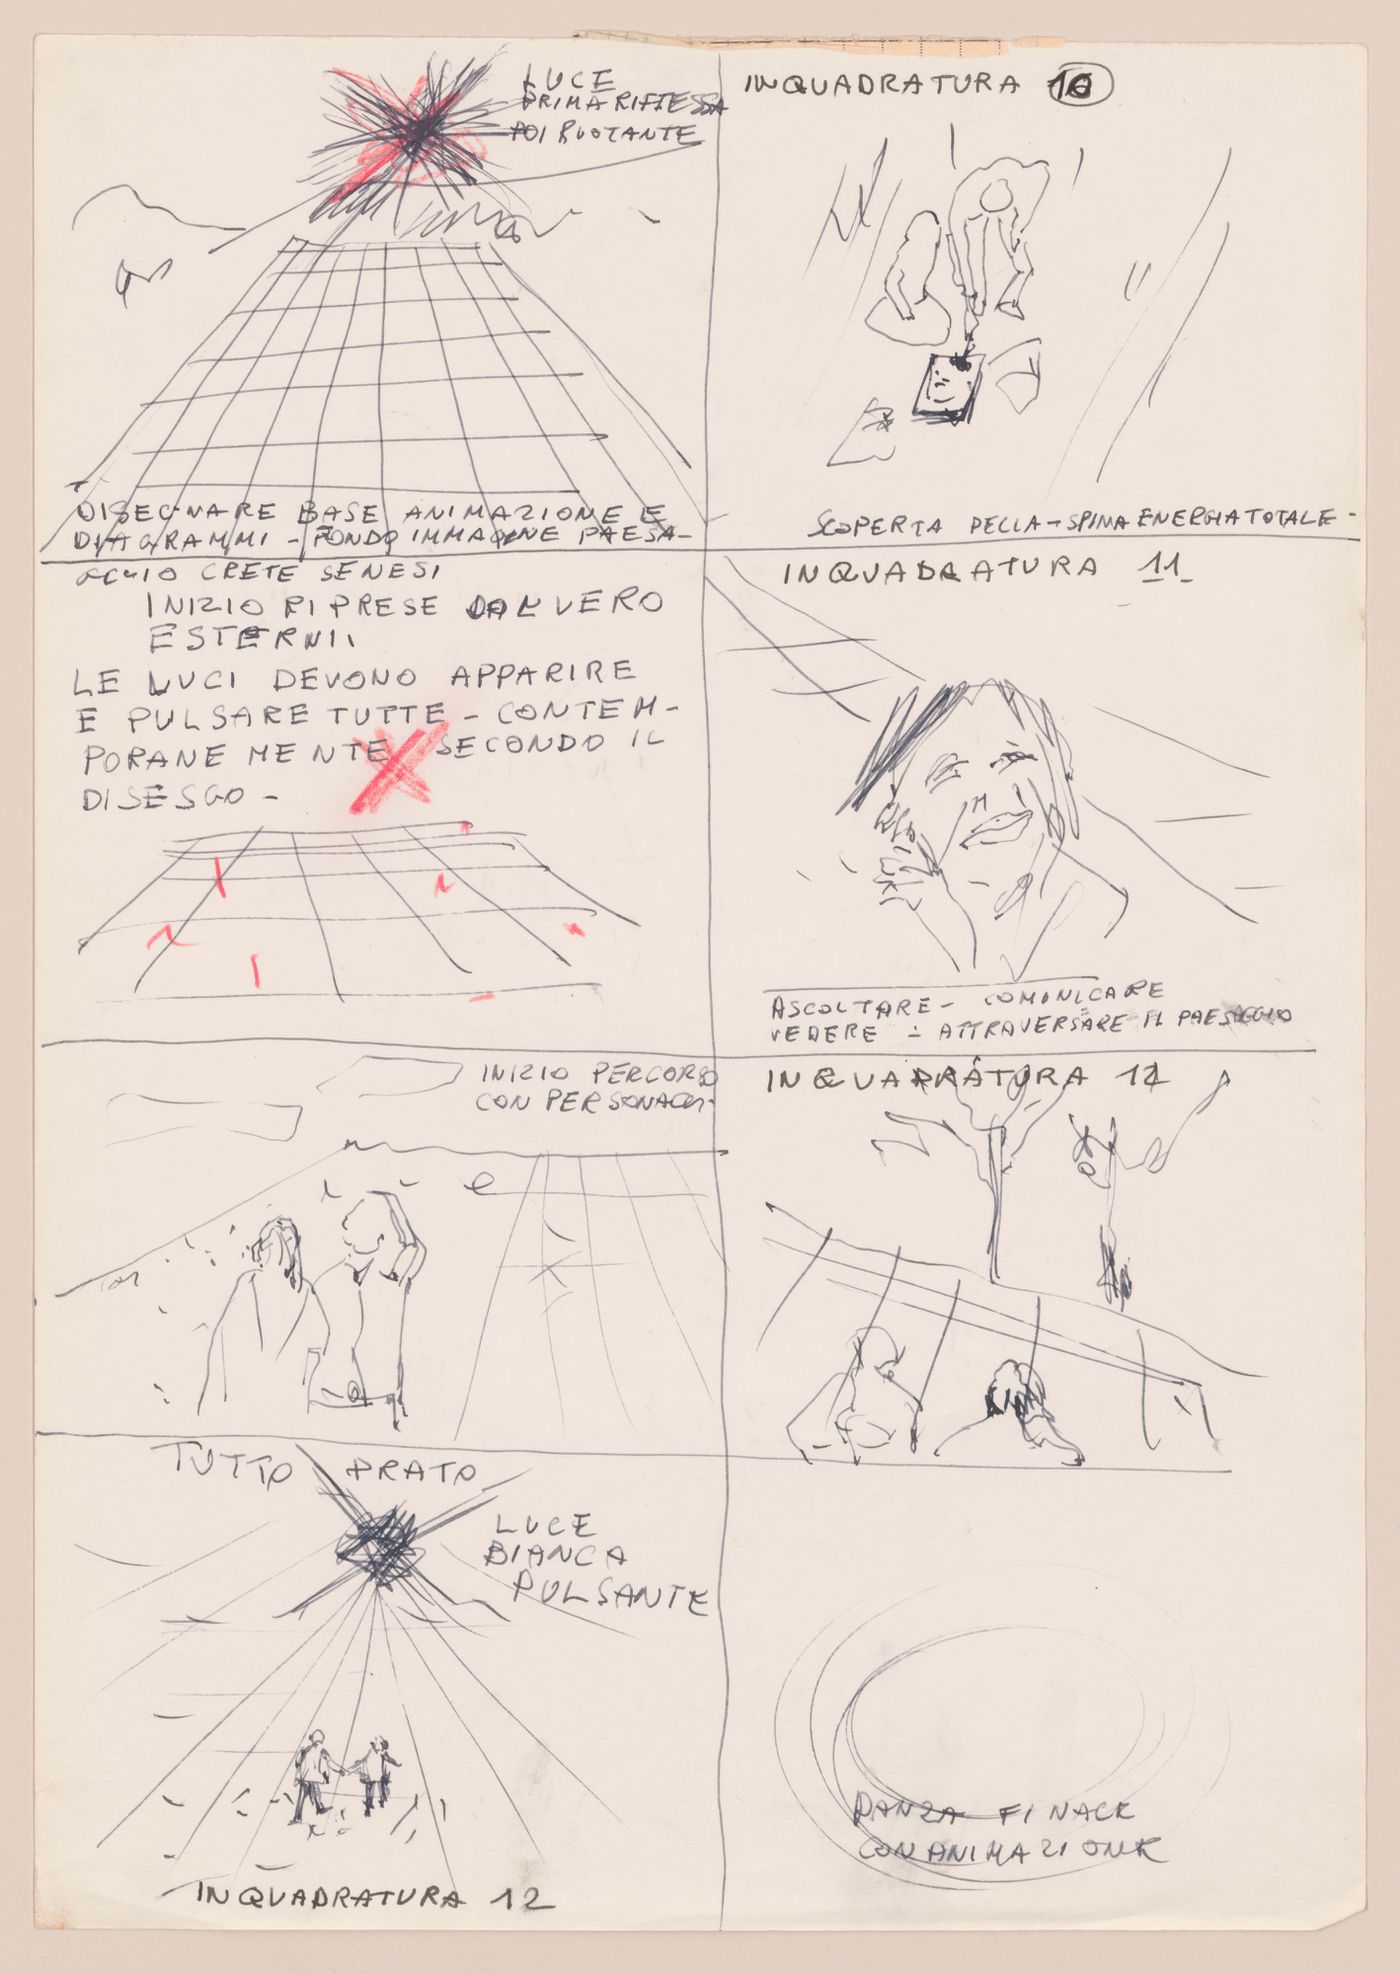 Page 11 of a storyboard describing filming locations and planning sketches of various scenes for Supersuperficie [Supersurface]